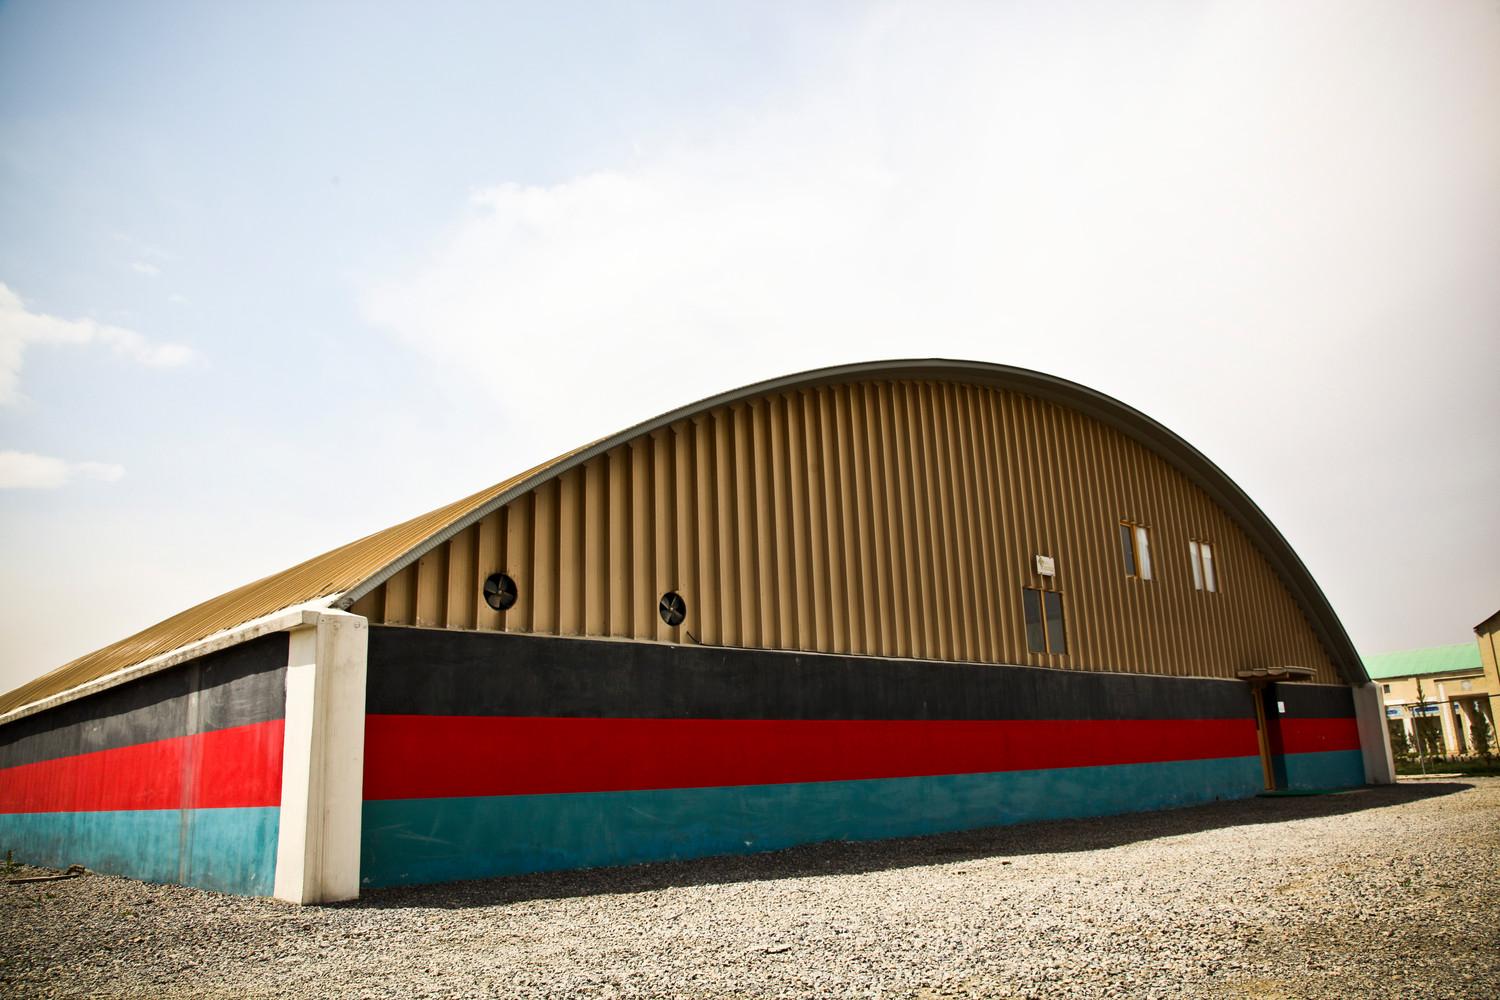 External view of Skateistan facility from front, painted with the Afghan colors